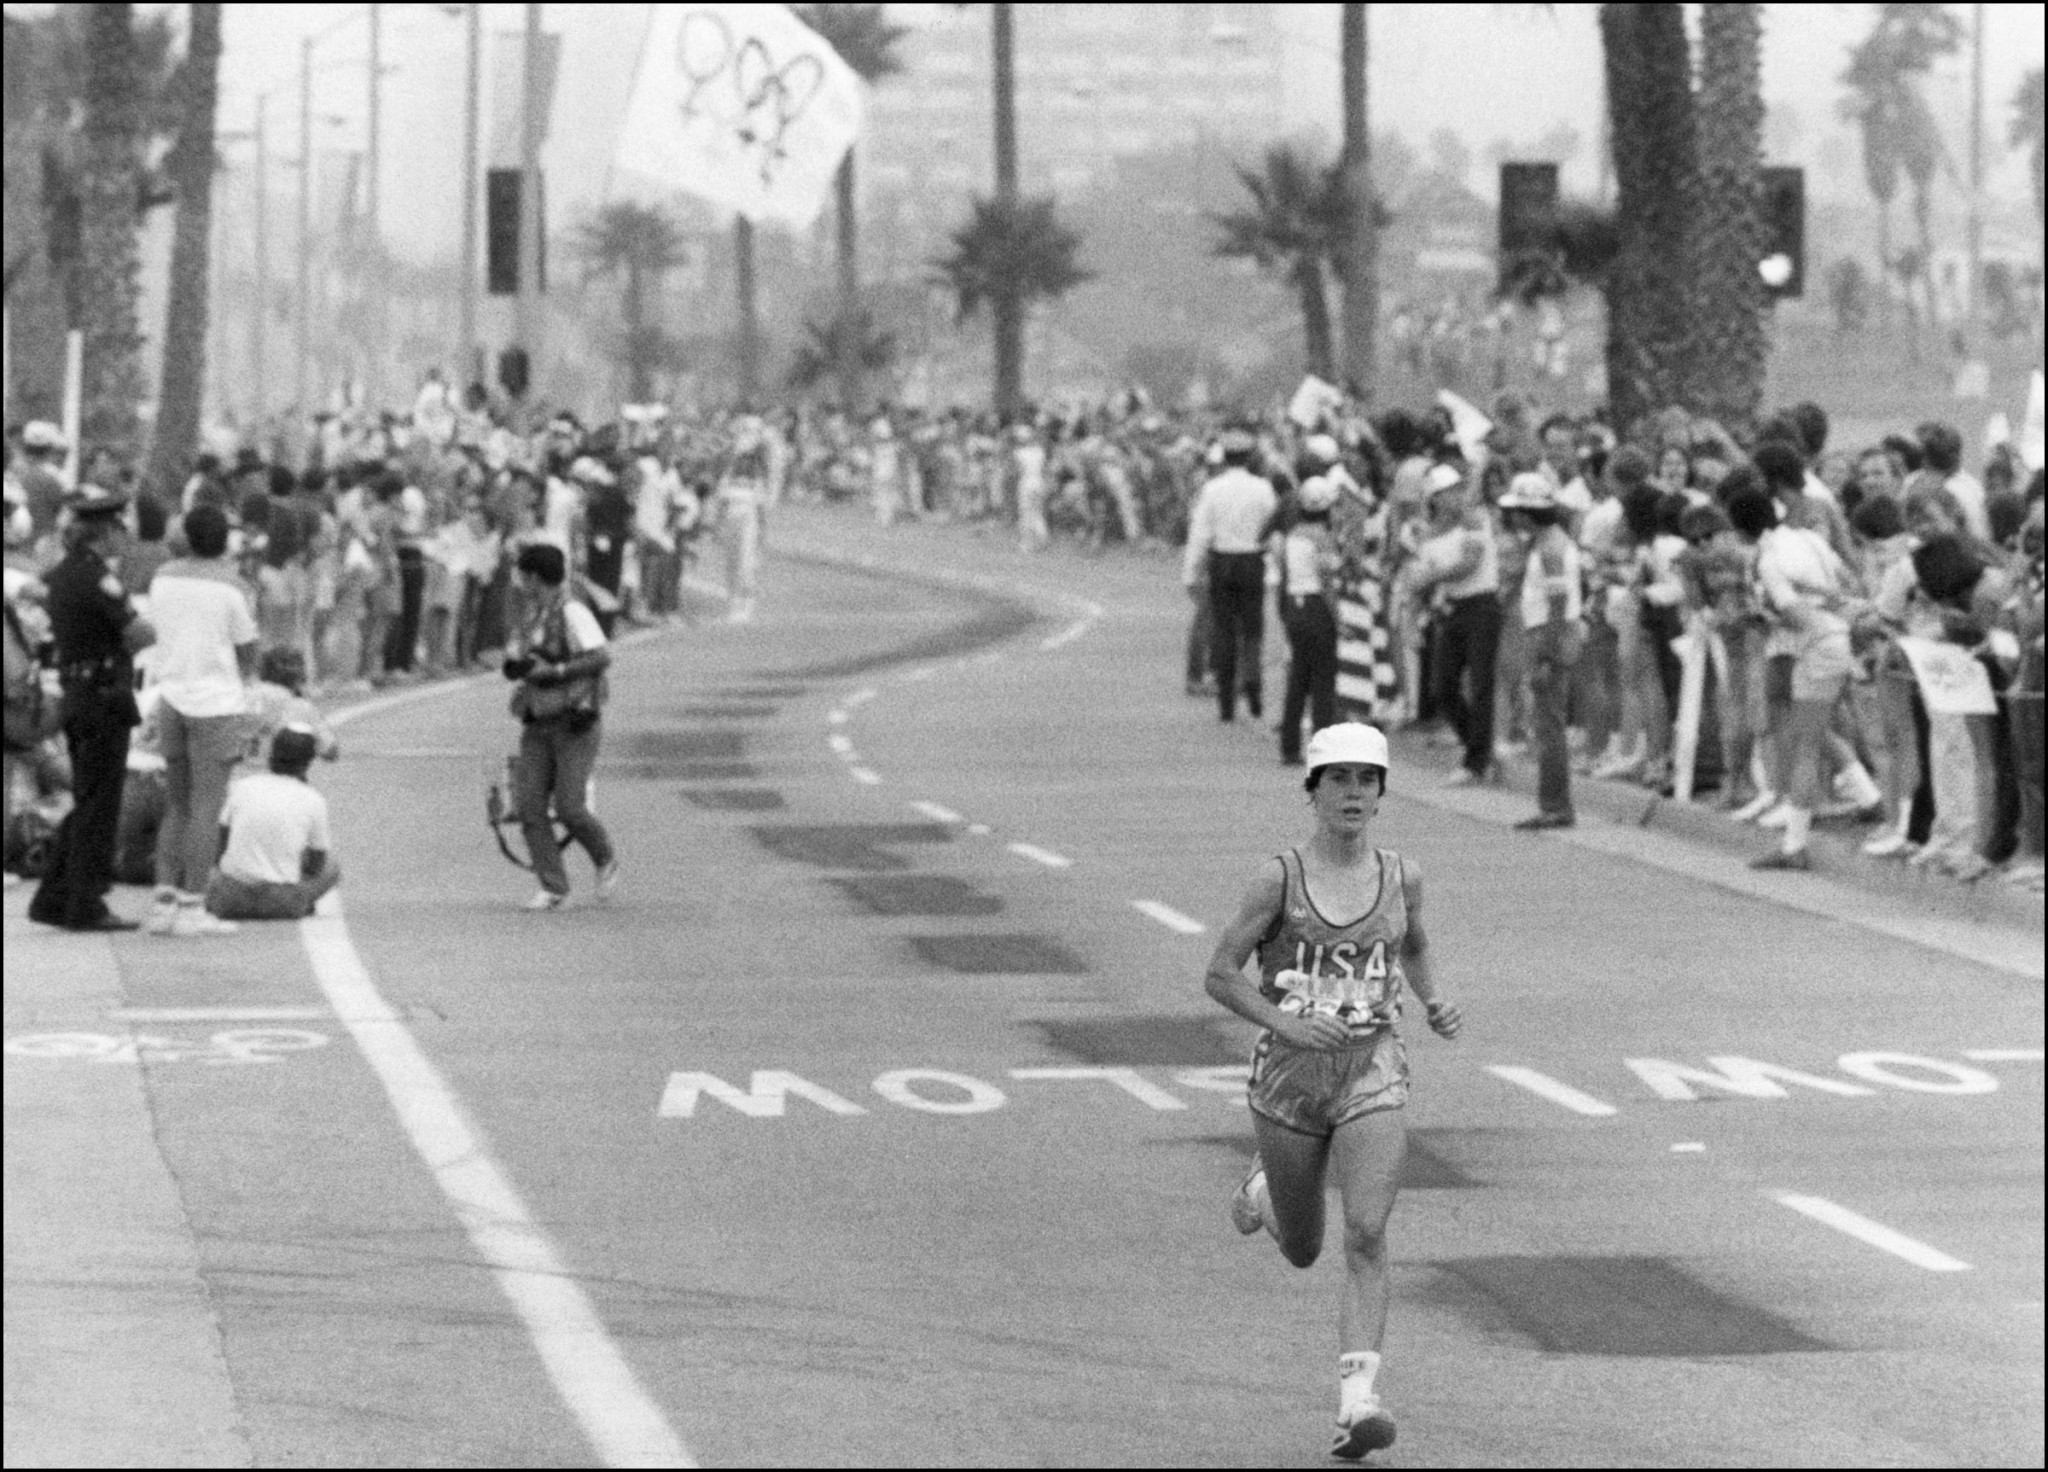 Women have competed the marathon distance at the Olympics since Los Angeles 1984, when the United States Joan Benoit won the inaugural edition ©AFP/Getty Images